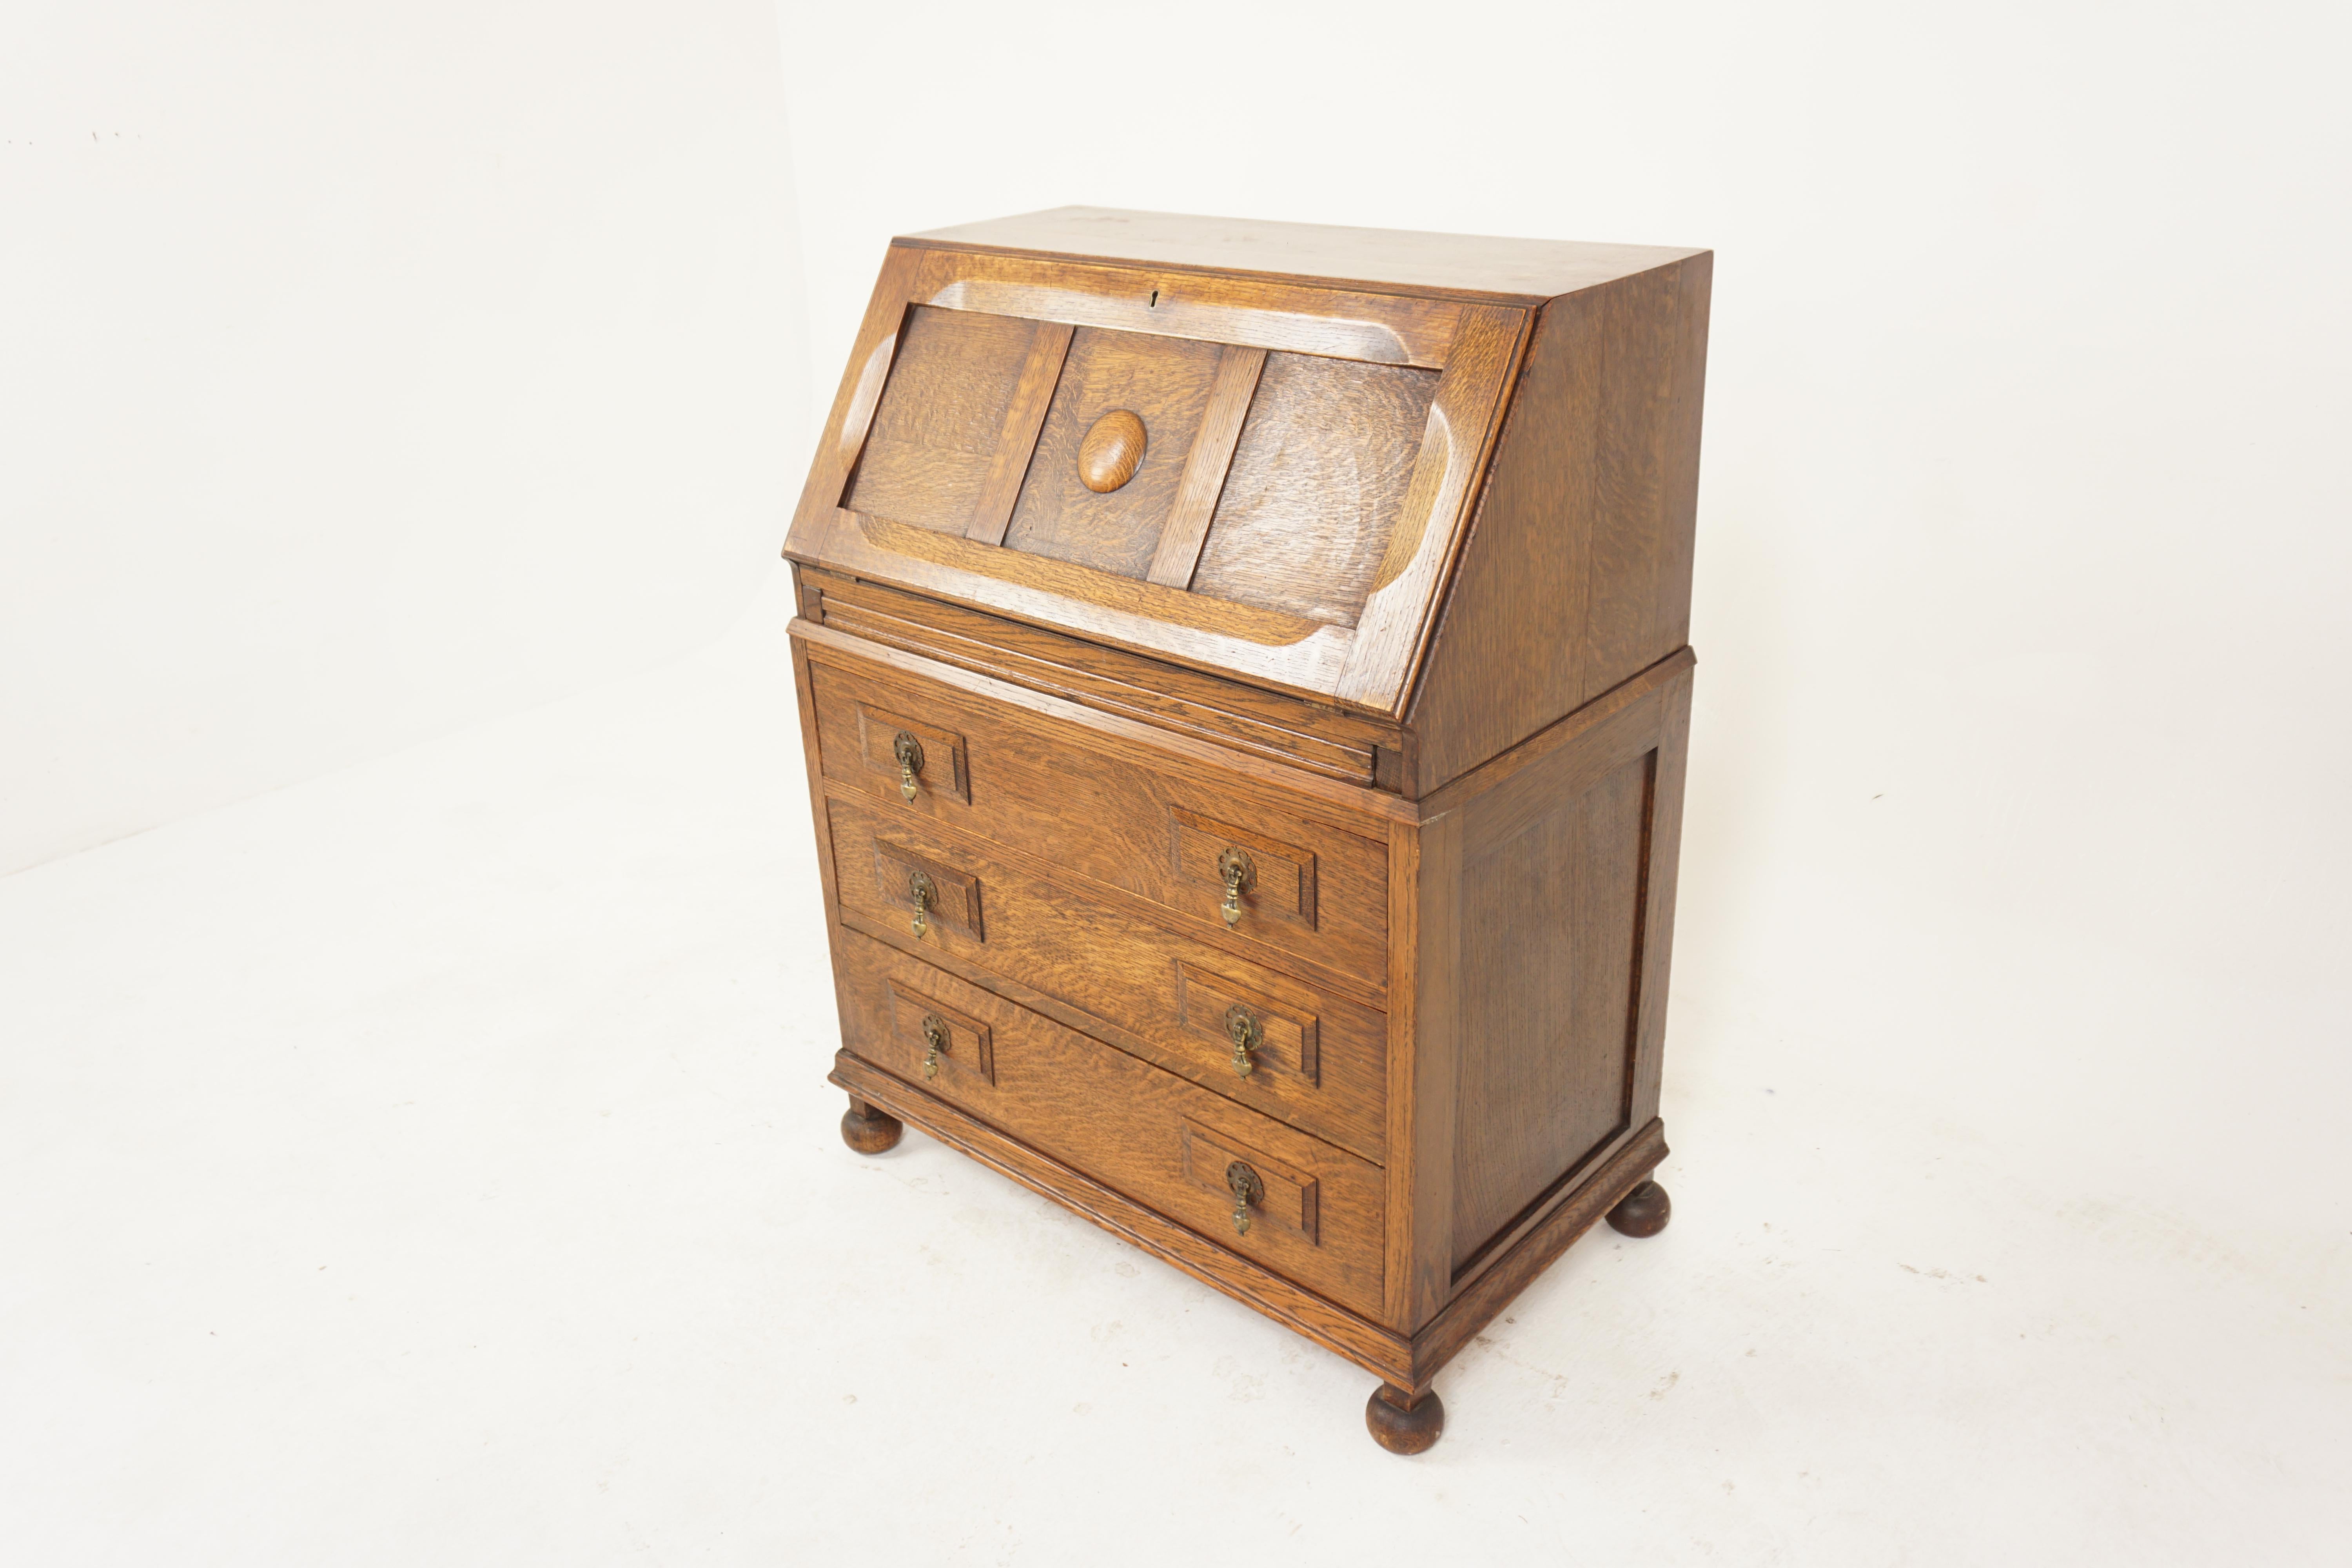 Vintage Oak Drop Front Desk, Slant Front desk Writing Bureau, Scotland 1920, H758

Scotland 1920
Solid Oak
Original finish
Rectangular top
With panelled drop front opens to reveal fitted interior with pigeon holes and single pull out drawers